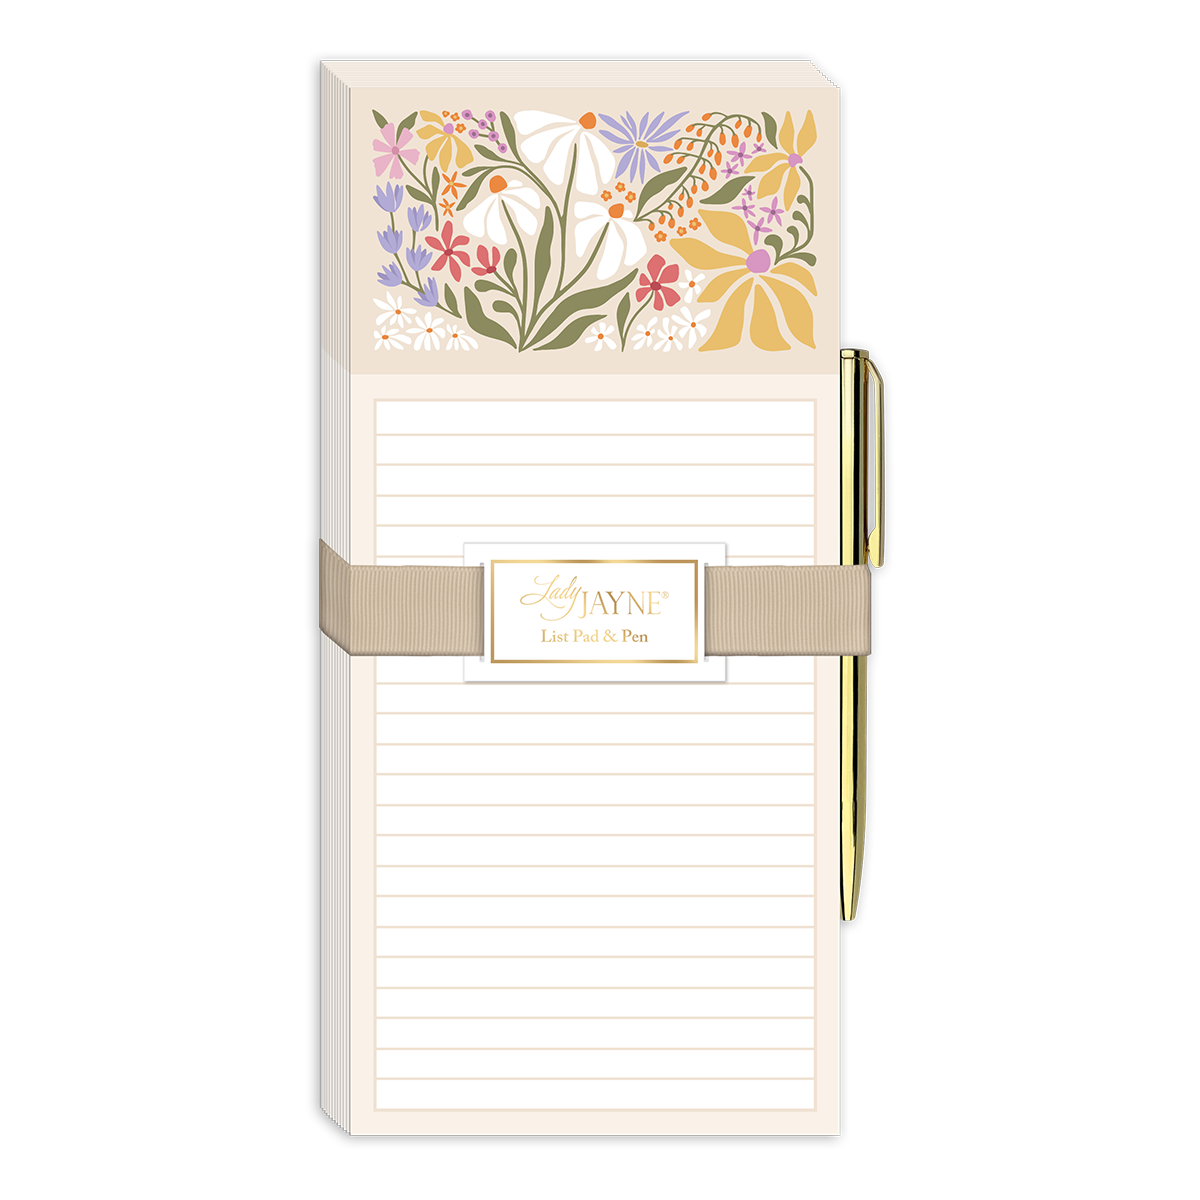 Flower Market Wildflowers Magnetic List Pad With Pen Product